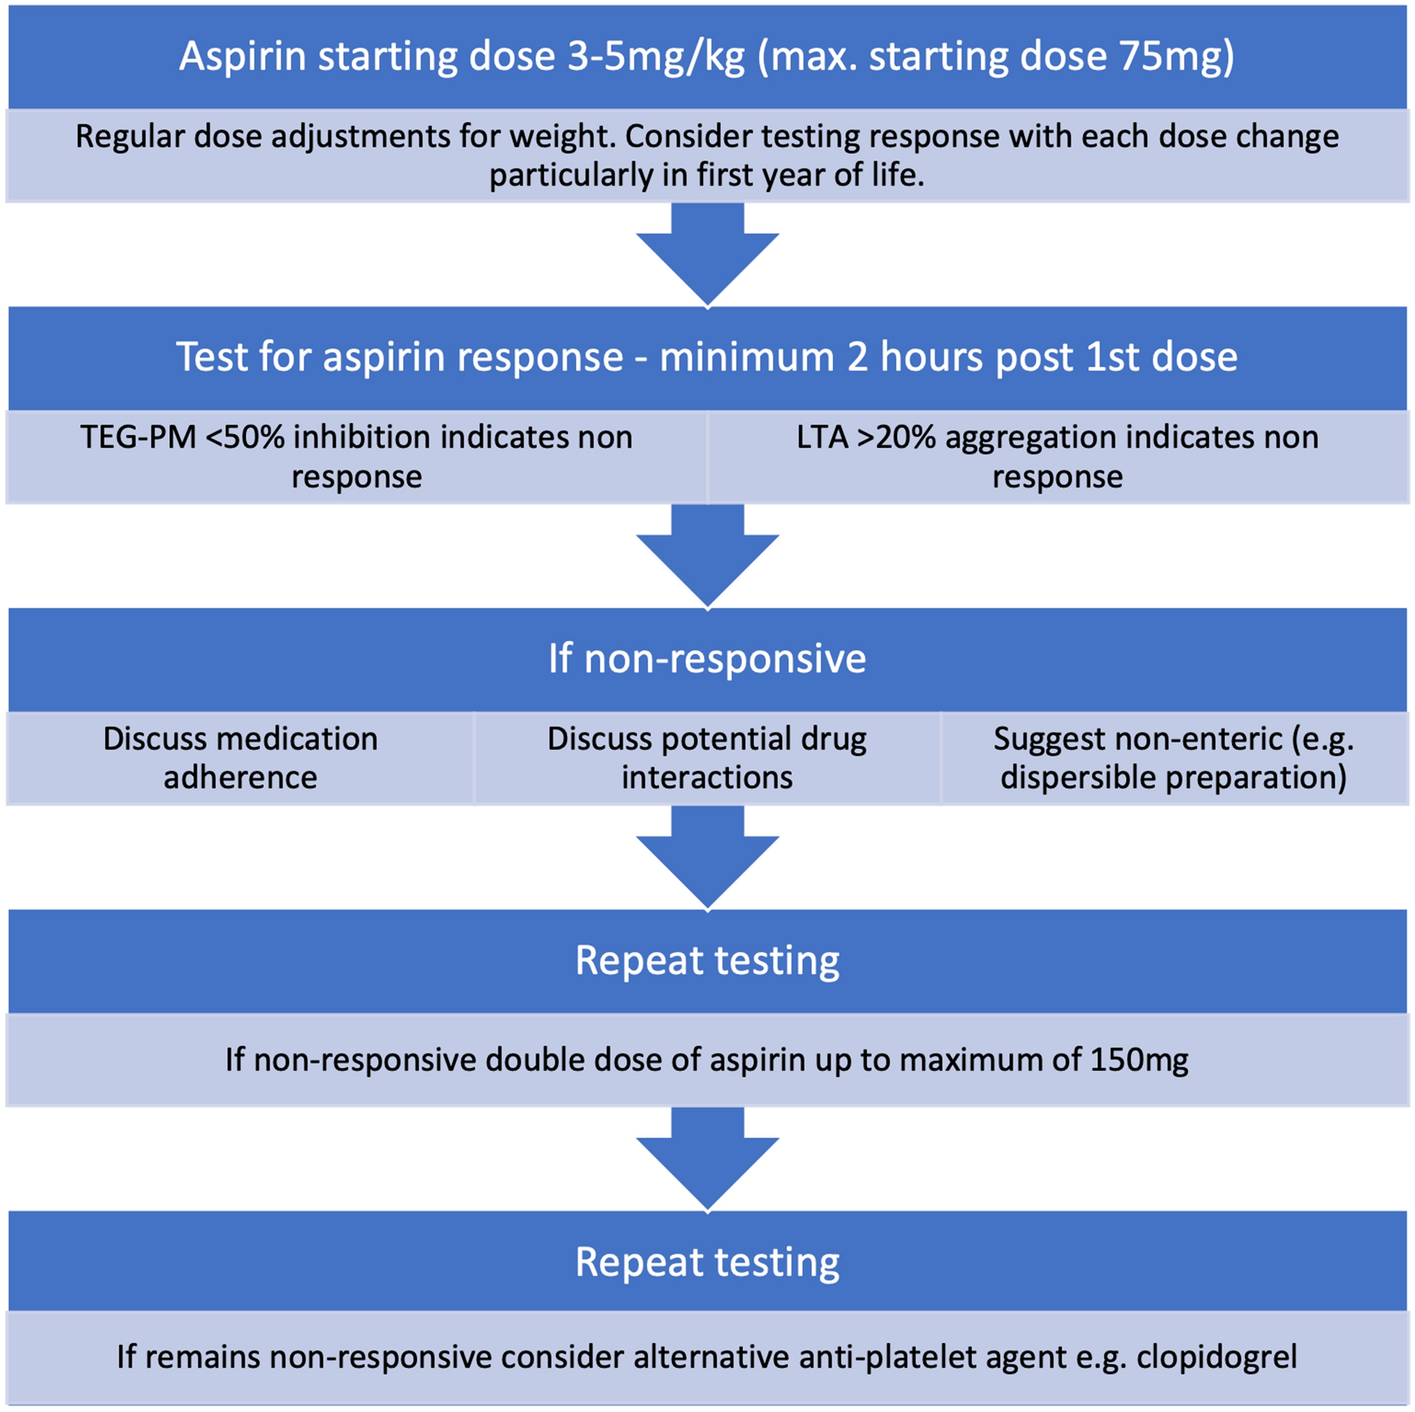 Aspirin Responsiveness in a Cohort of Pediatric Patients with Right Ventricle to Pulmonary Artery Conduits and Transcatheter Valve Replacement Systems